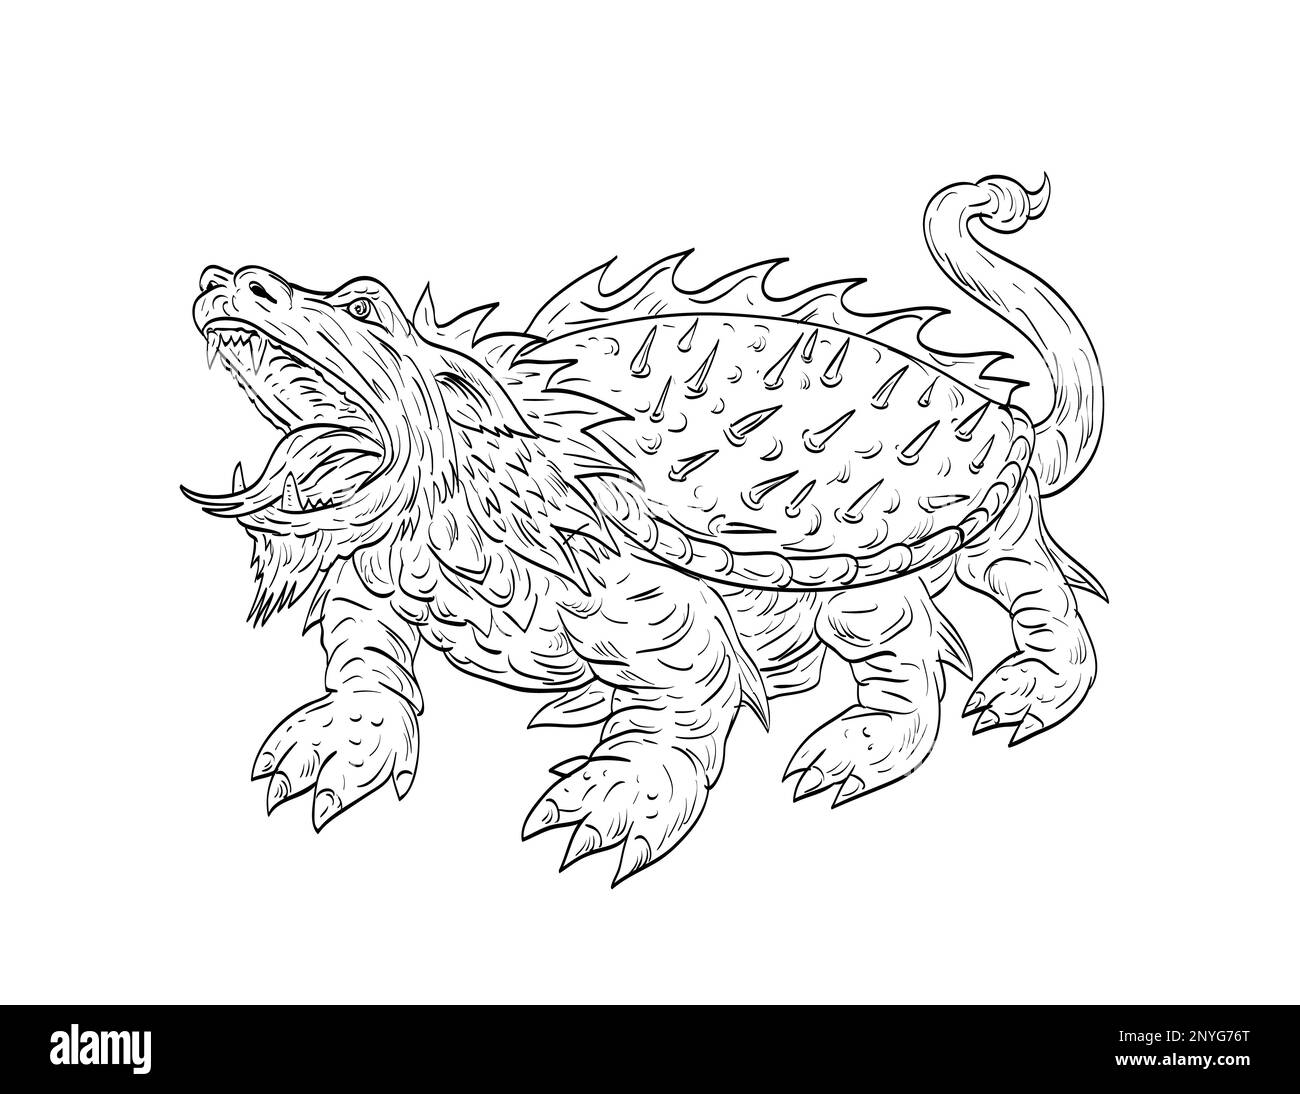 Line art drawing illustration of Tarasque, a fearsome legendary dragon-like mythological hybrid France in medieval style on isolated background. Stock Photo